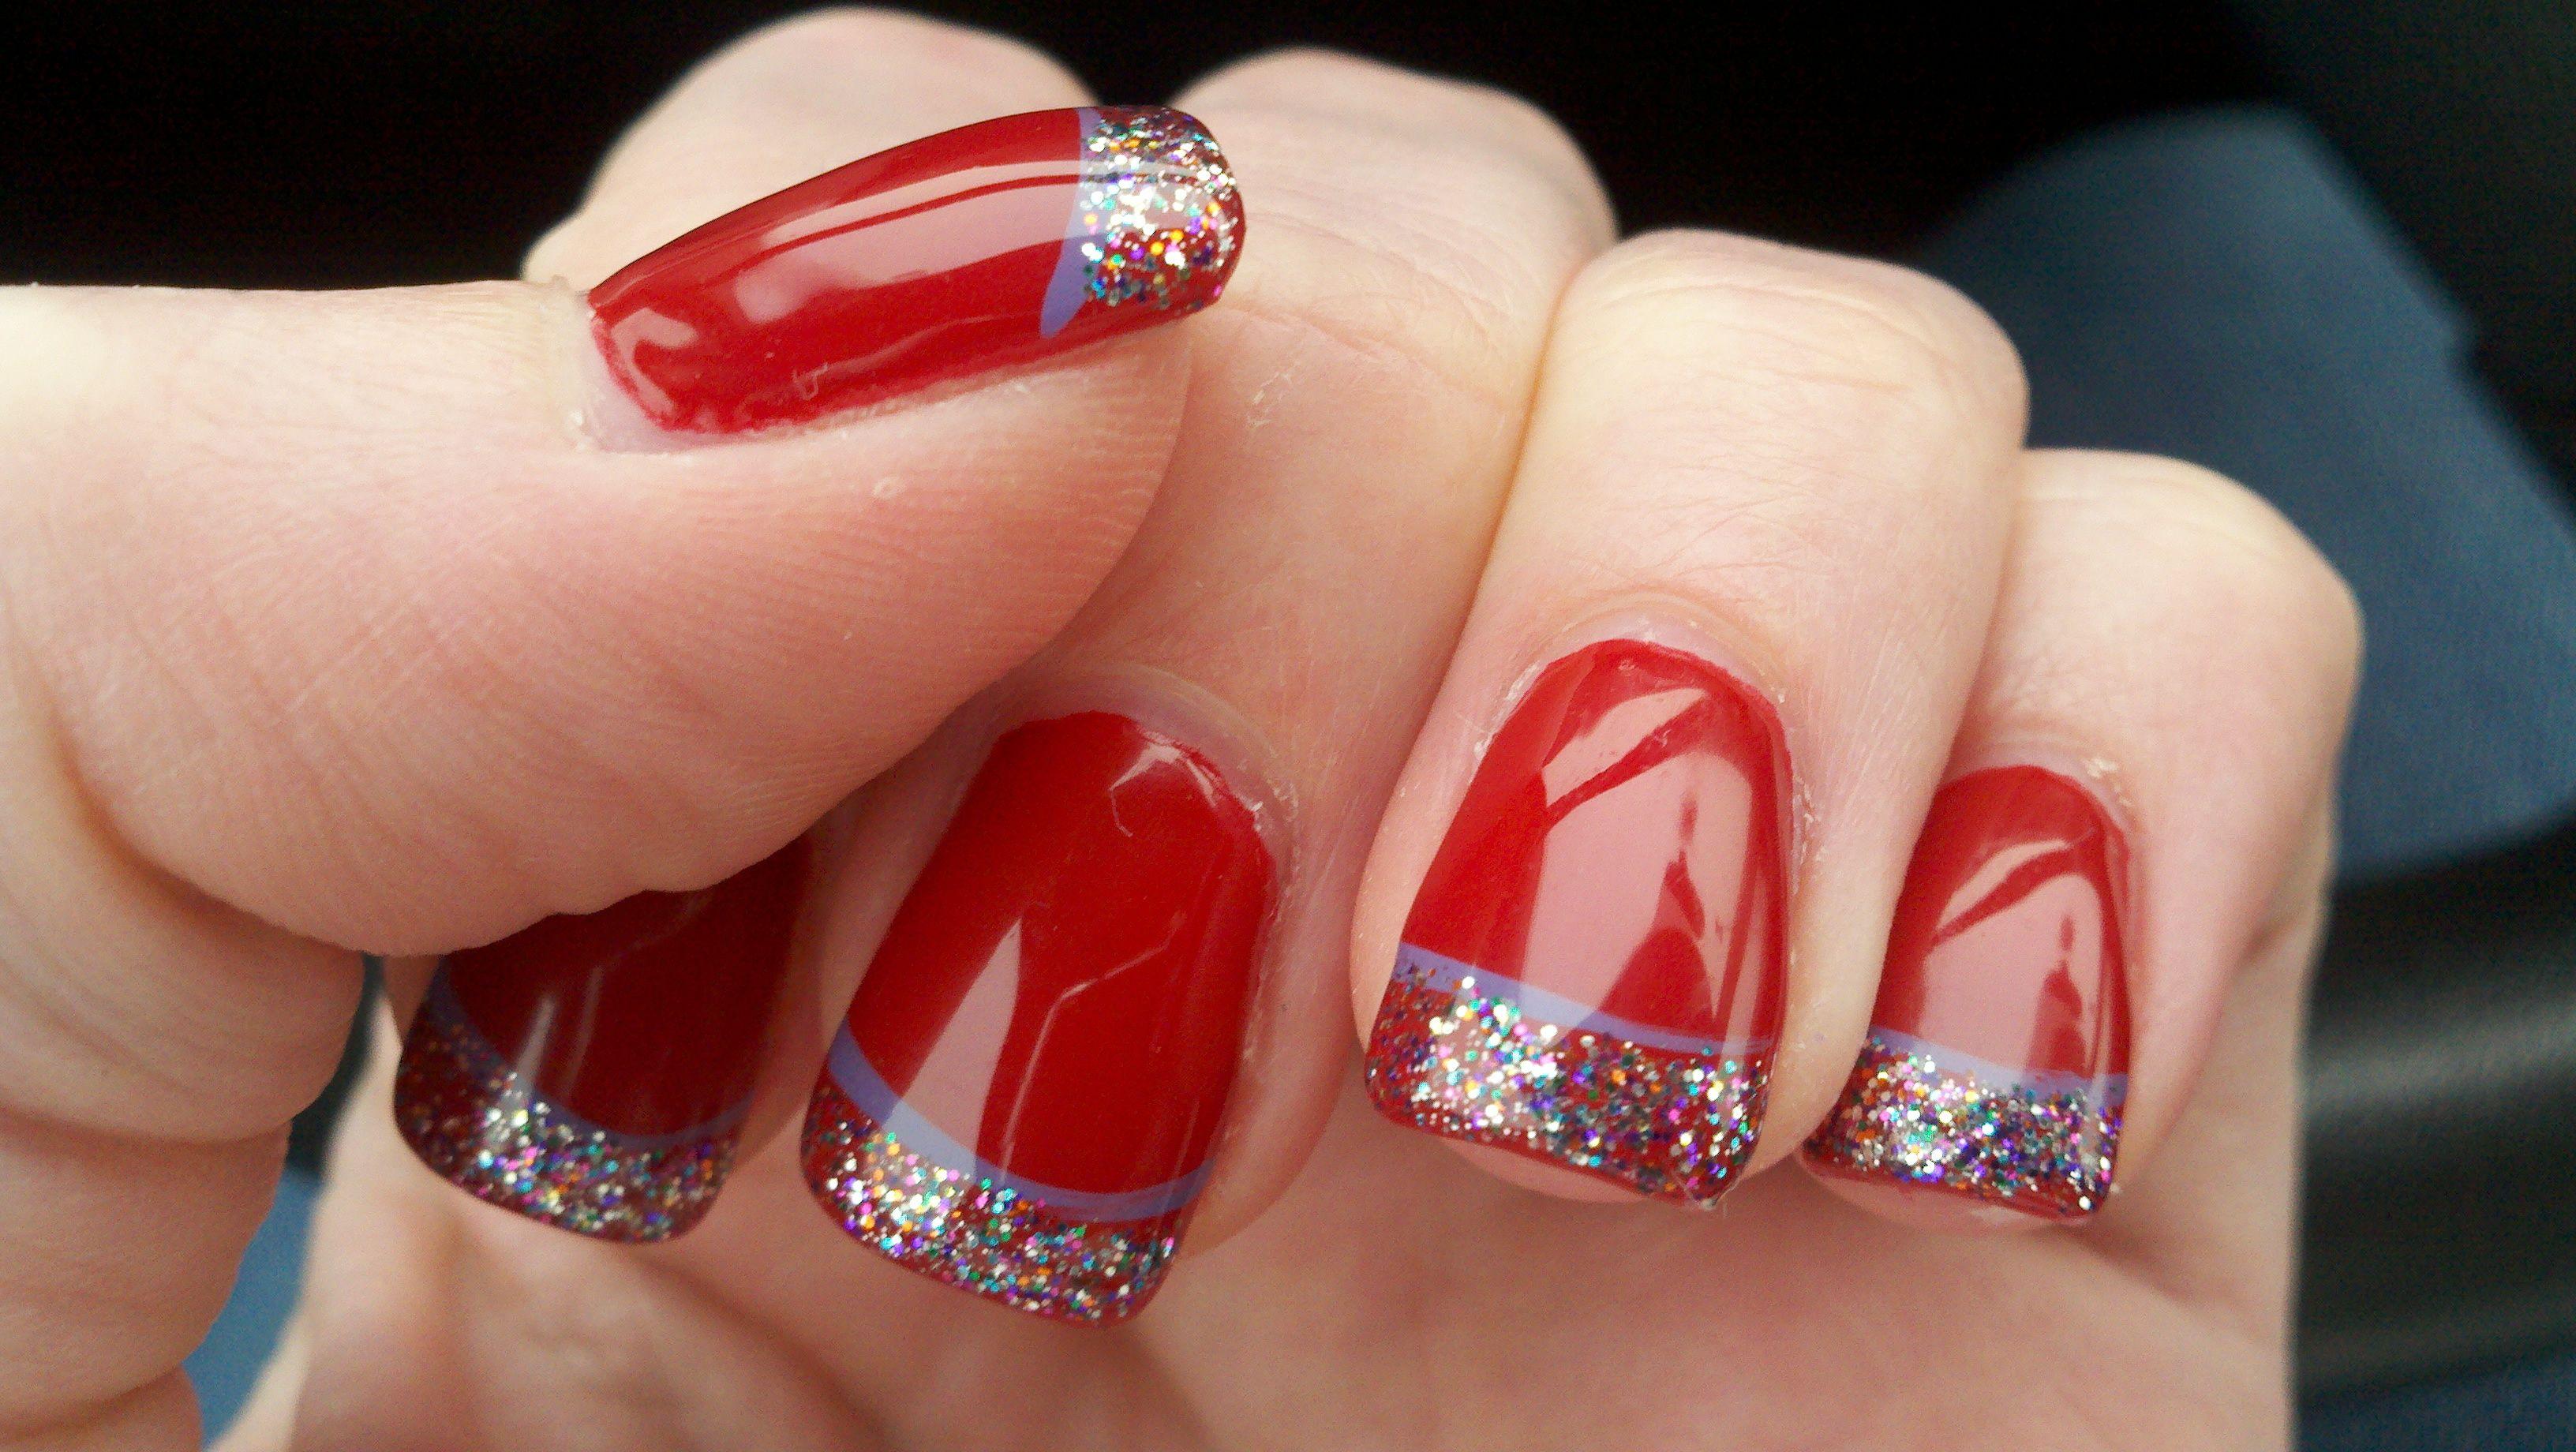 Red and White Gel Nail Designs - wide 8